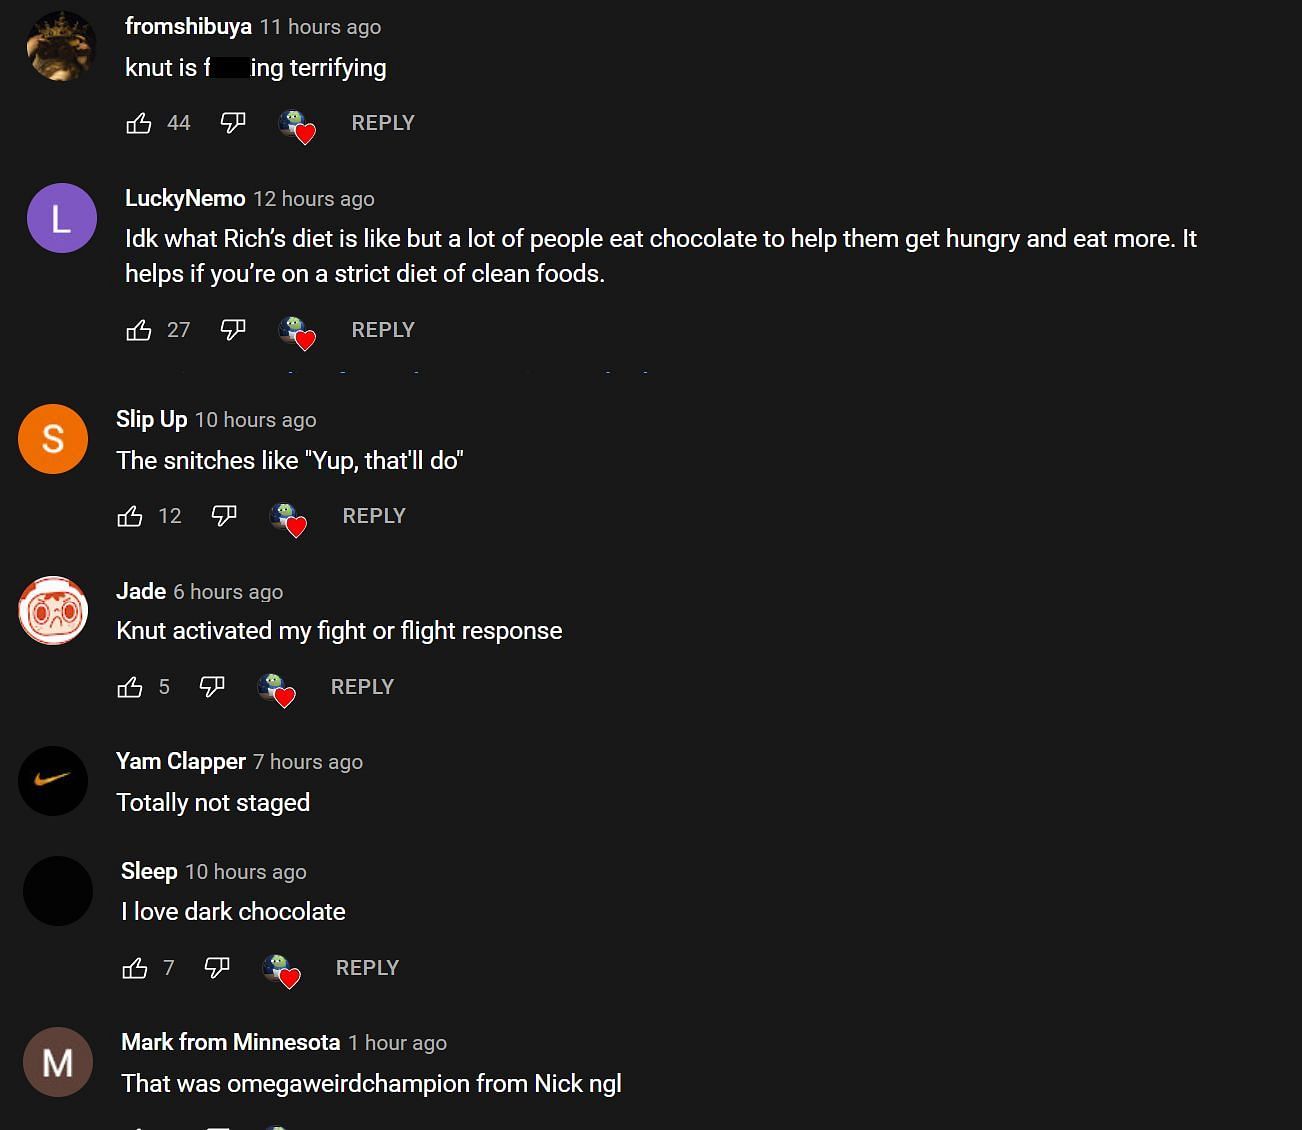 Fans react to Rich cheating on his diet (Image via El Pepegarino/YouTube)